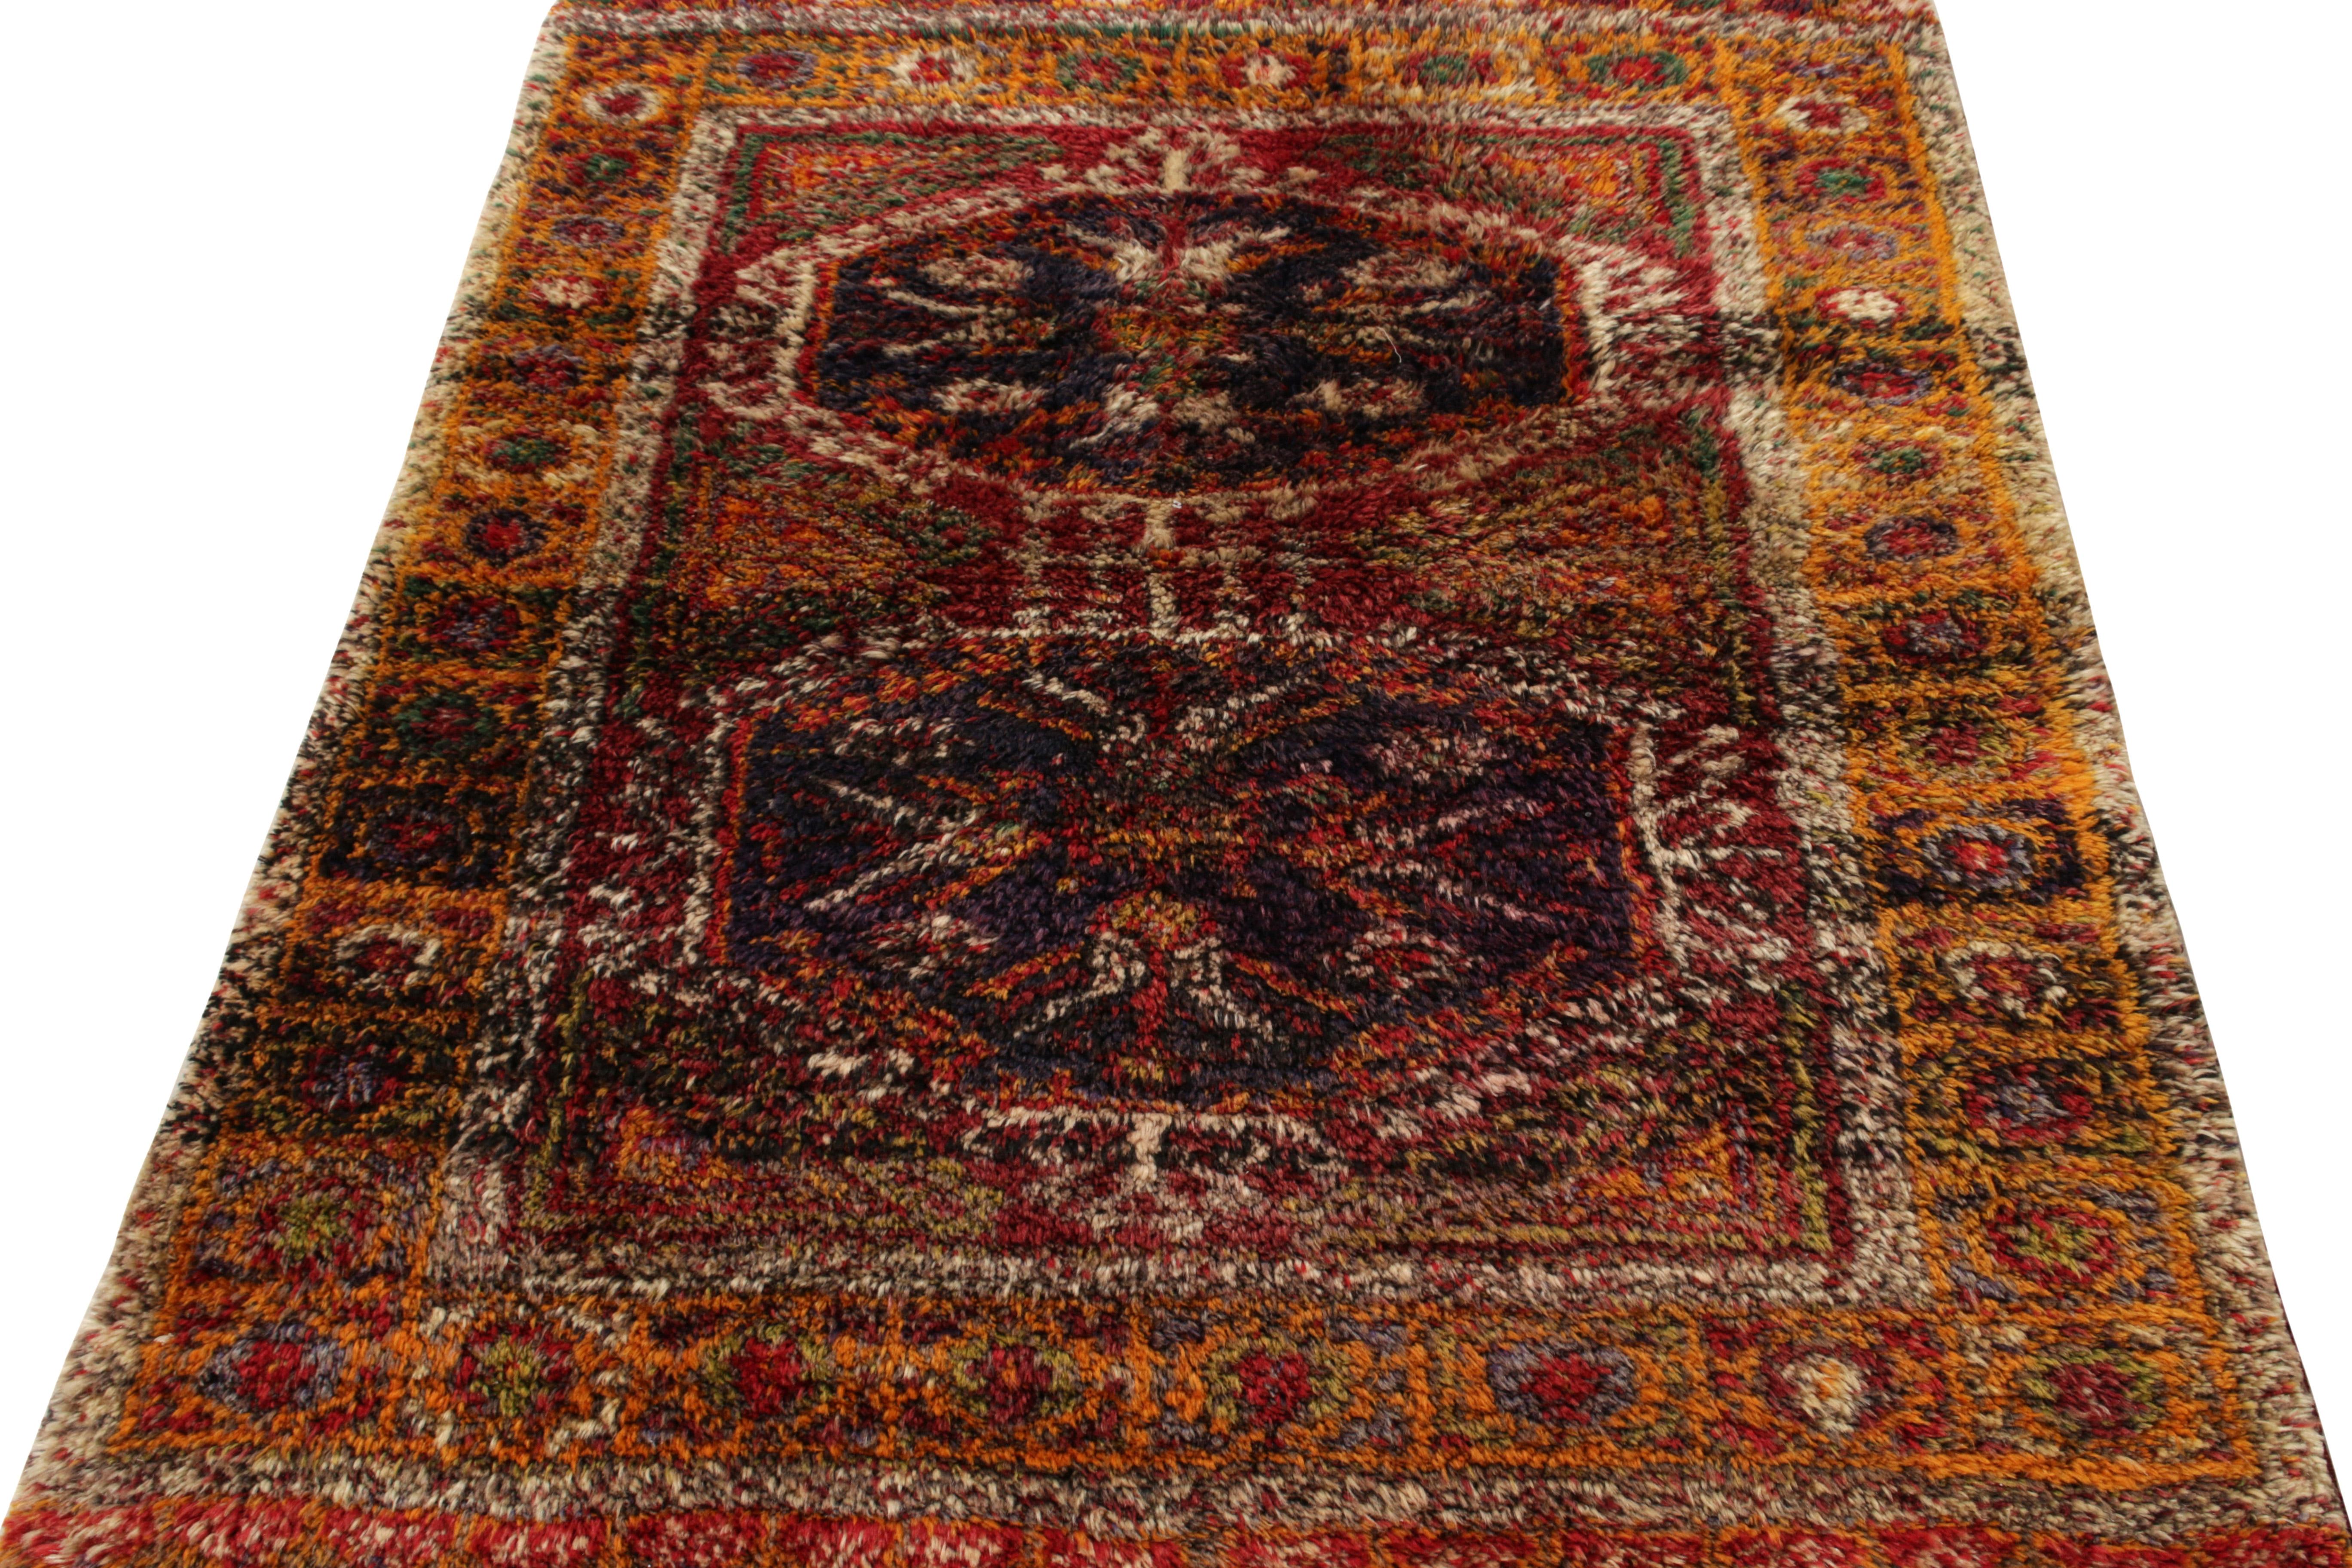 Hand-knotted in luscious, sheen wool, this 4x5 Turkish vintage Tulu rug revels in the warmth and rustic appeal of traditional geometric patterns relishing a soft & comforting pile. Originating circa 1950-1960, witnessing an enticing colorplay of